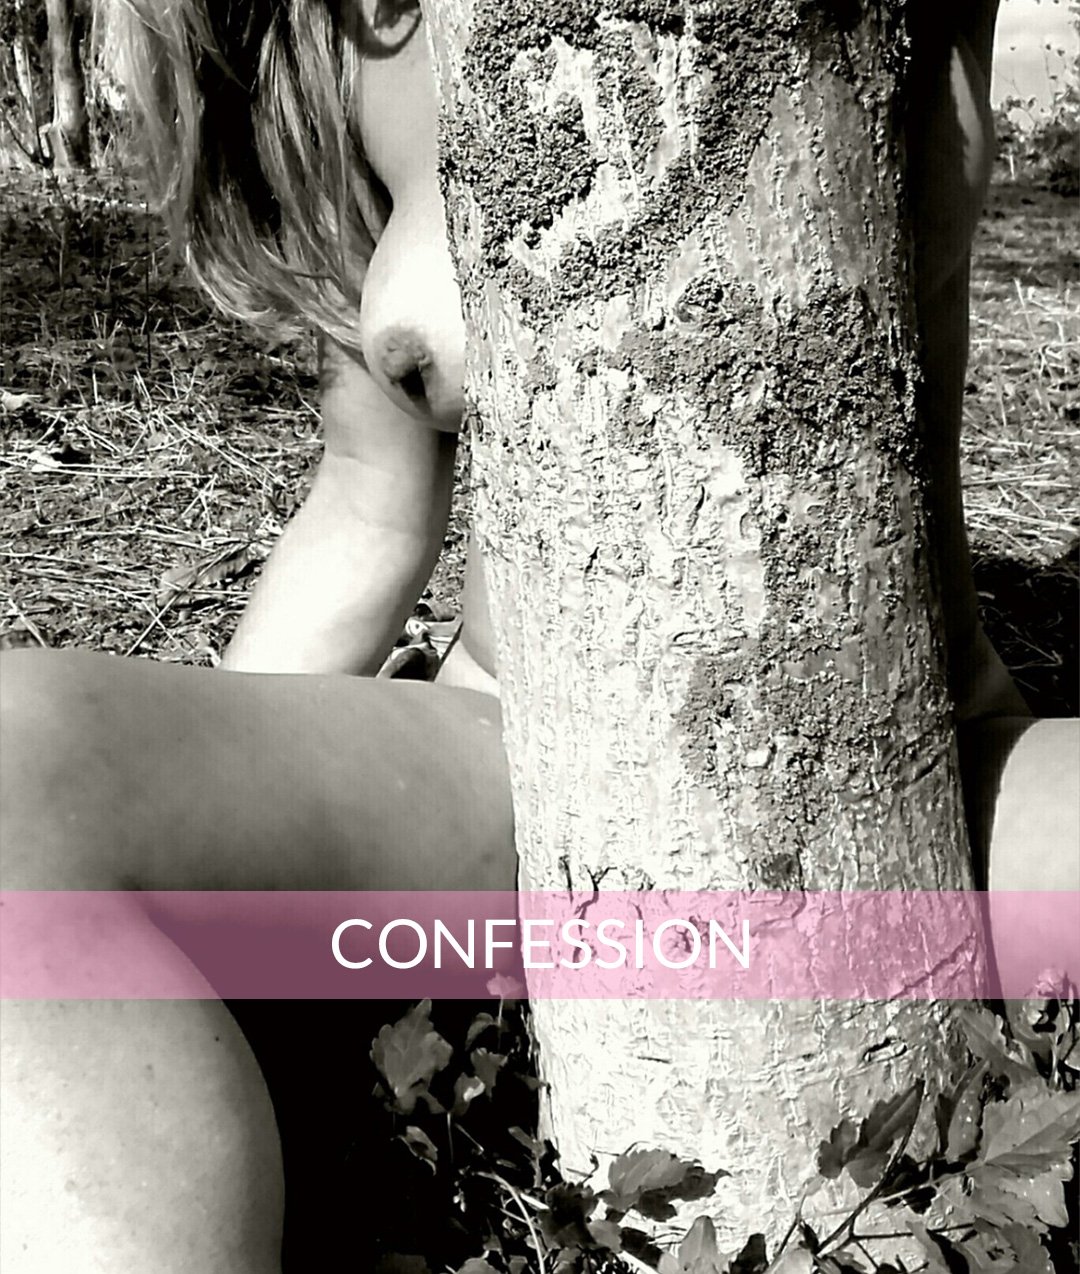 My readers real sex story confessions from couples and women photo